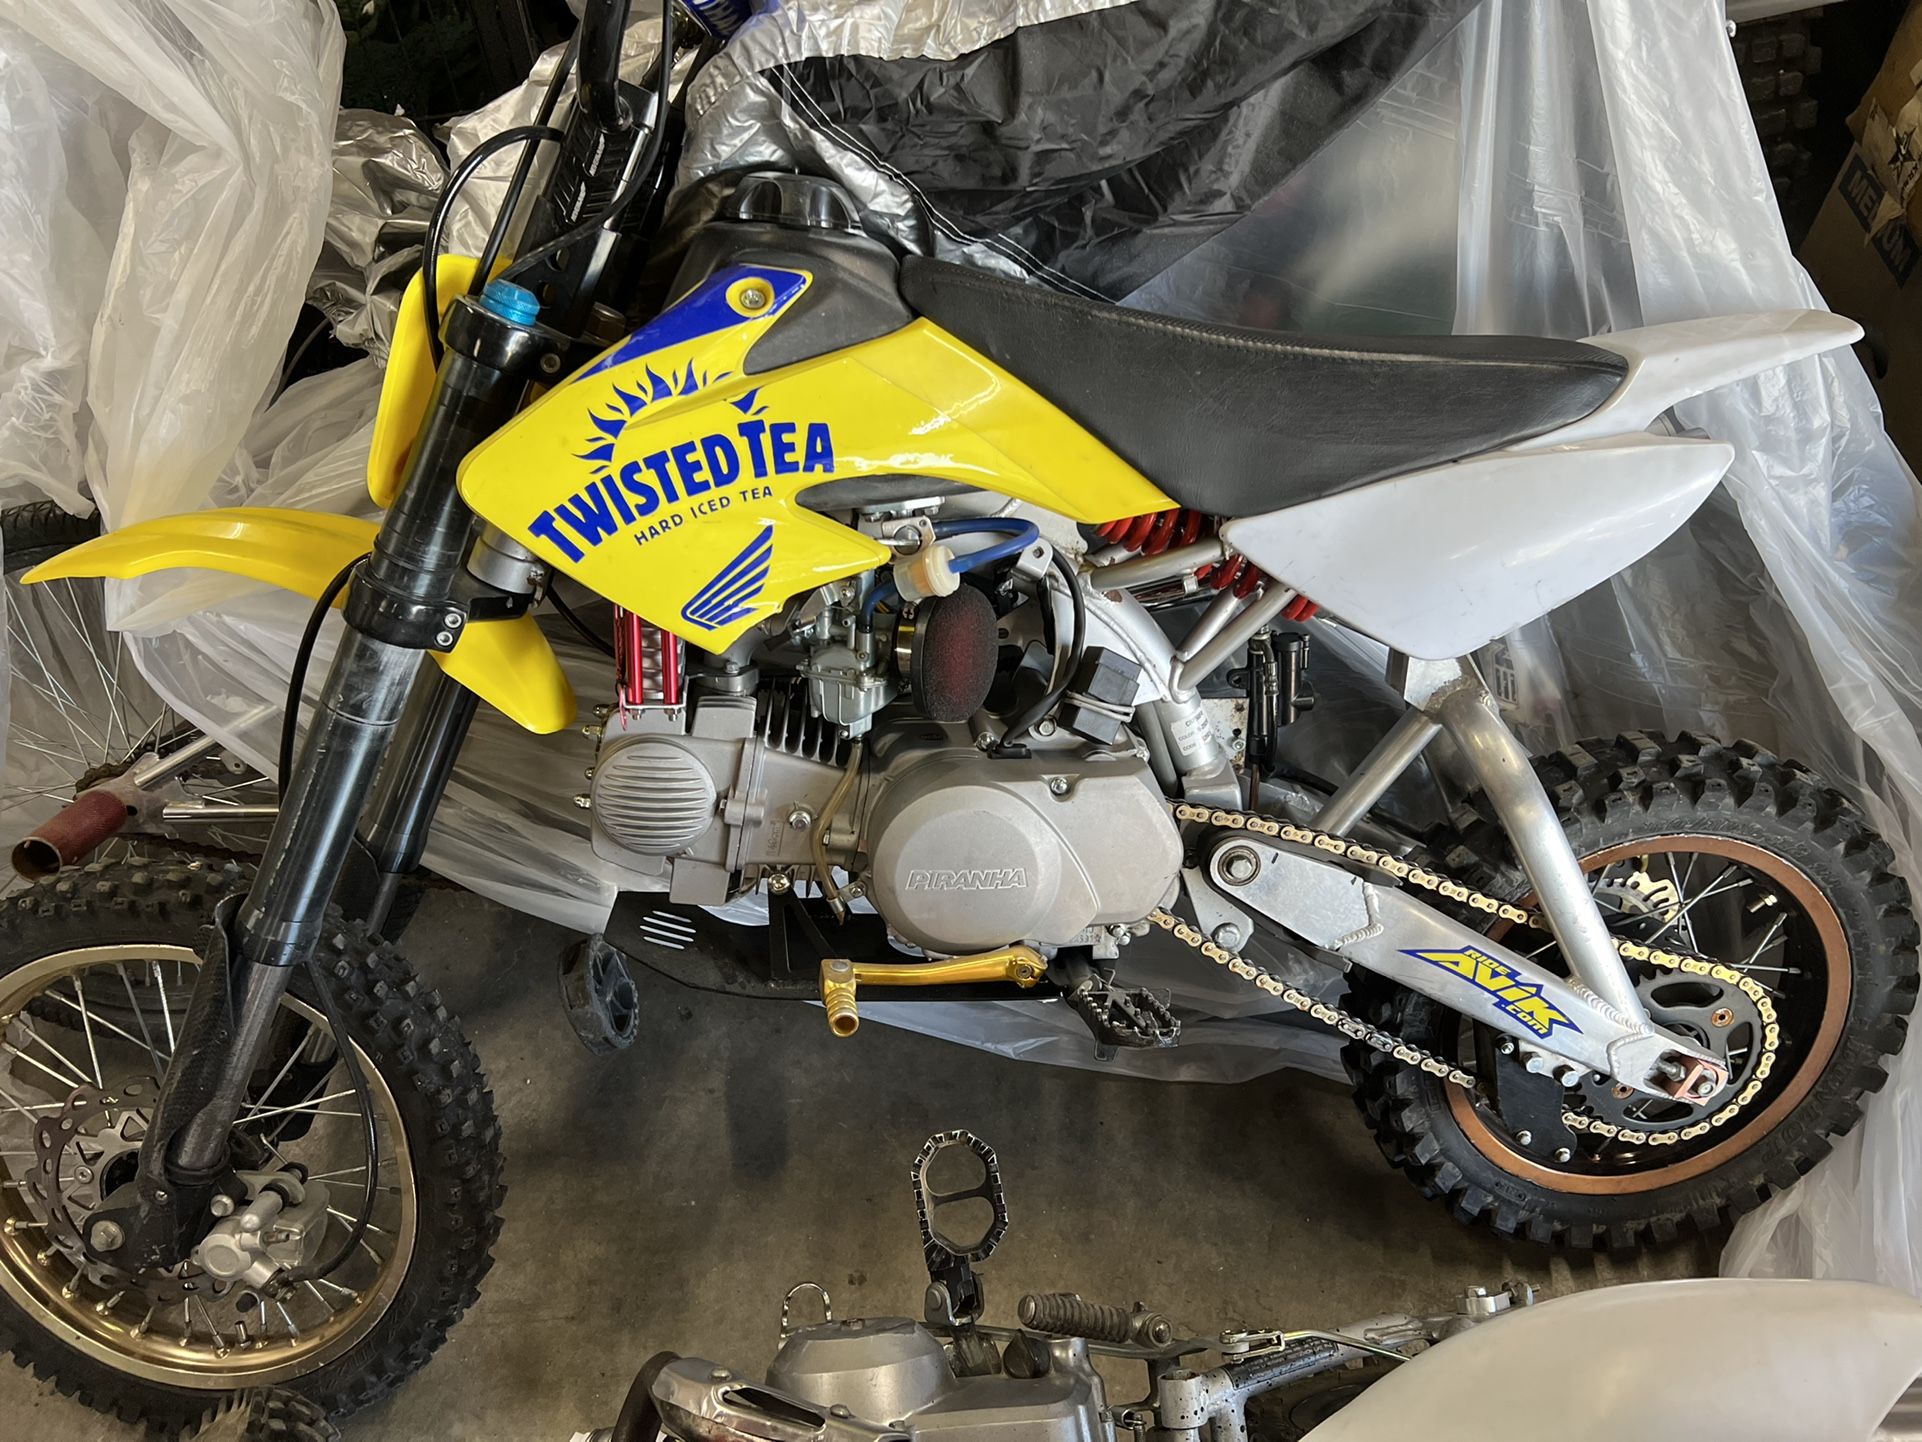 2007 Honda CRF 50 with title